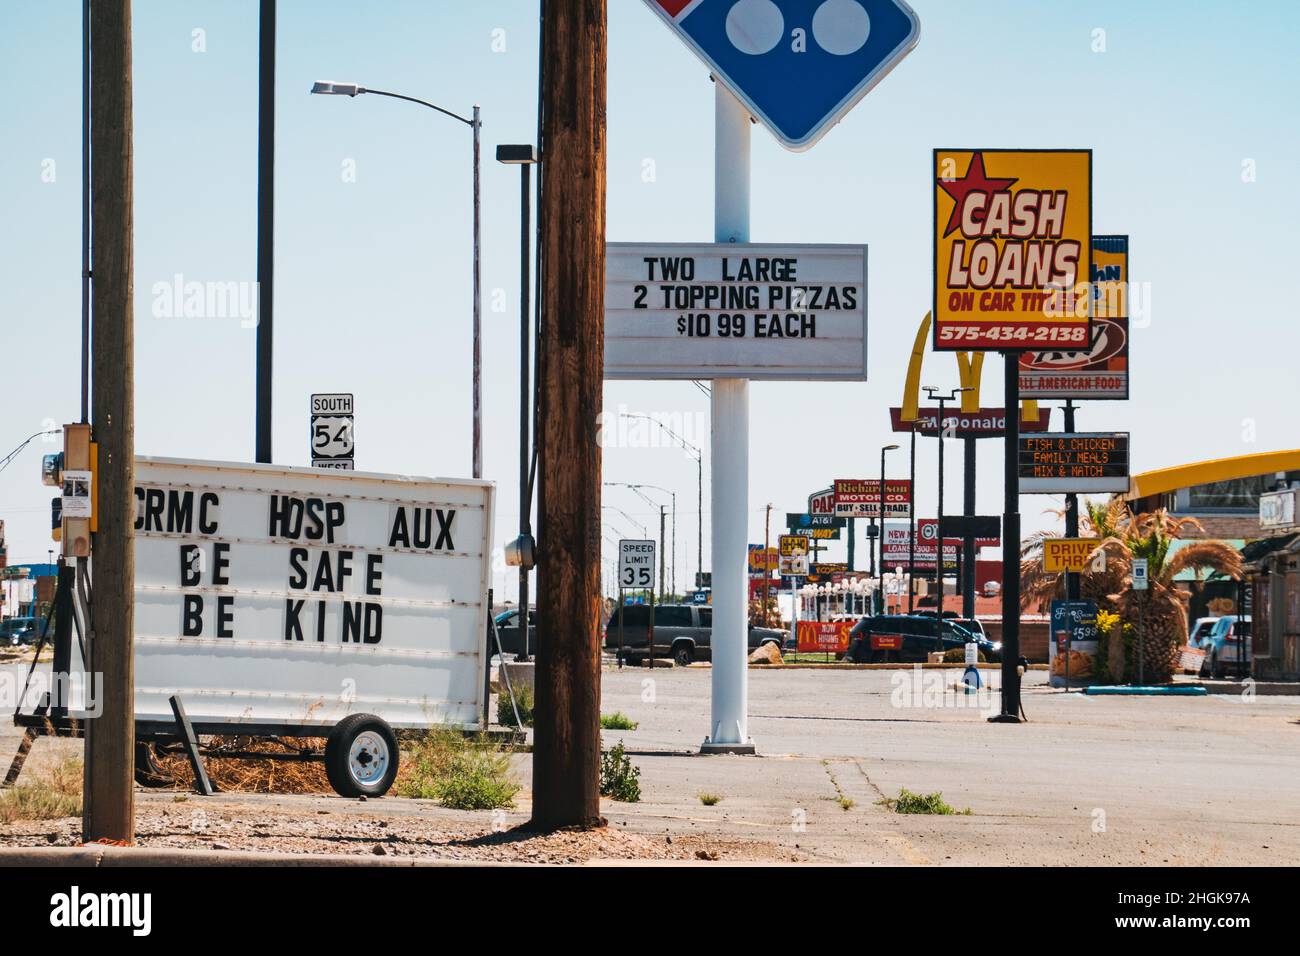 The main street littered with fast food and loan signage in Alamogordo, New Mexico, United States Stock Photo